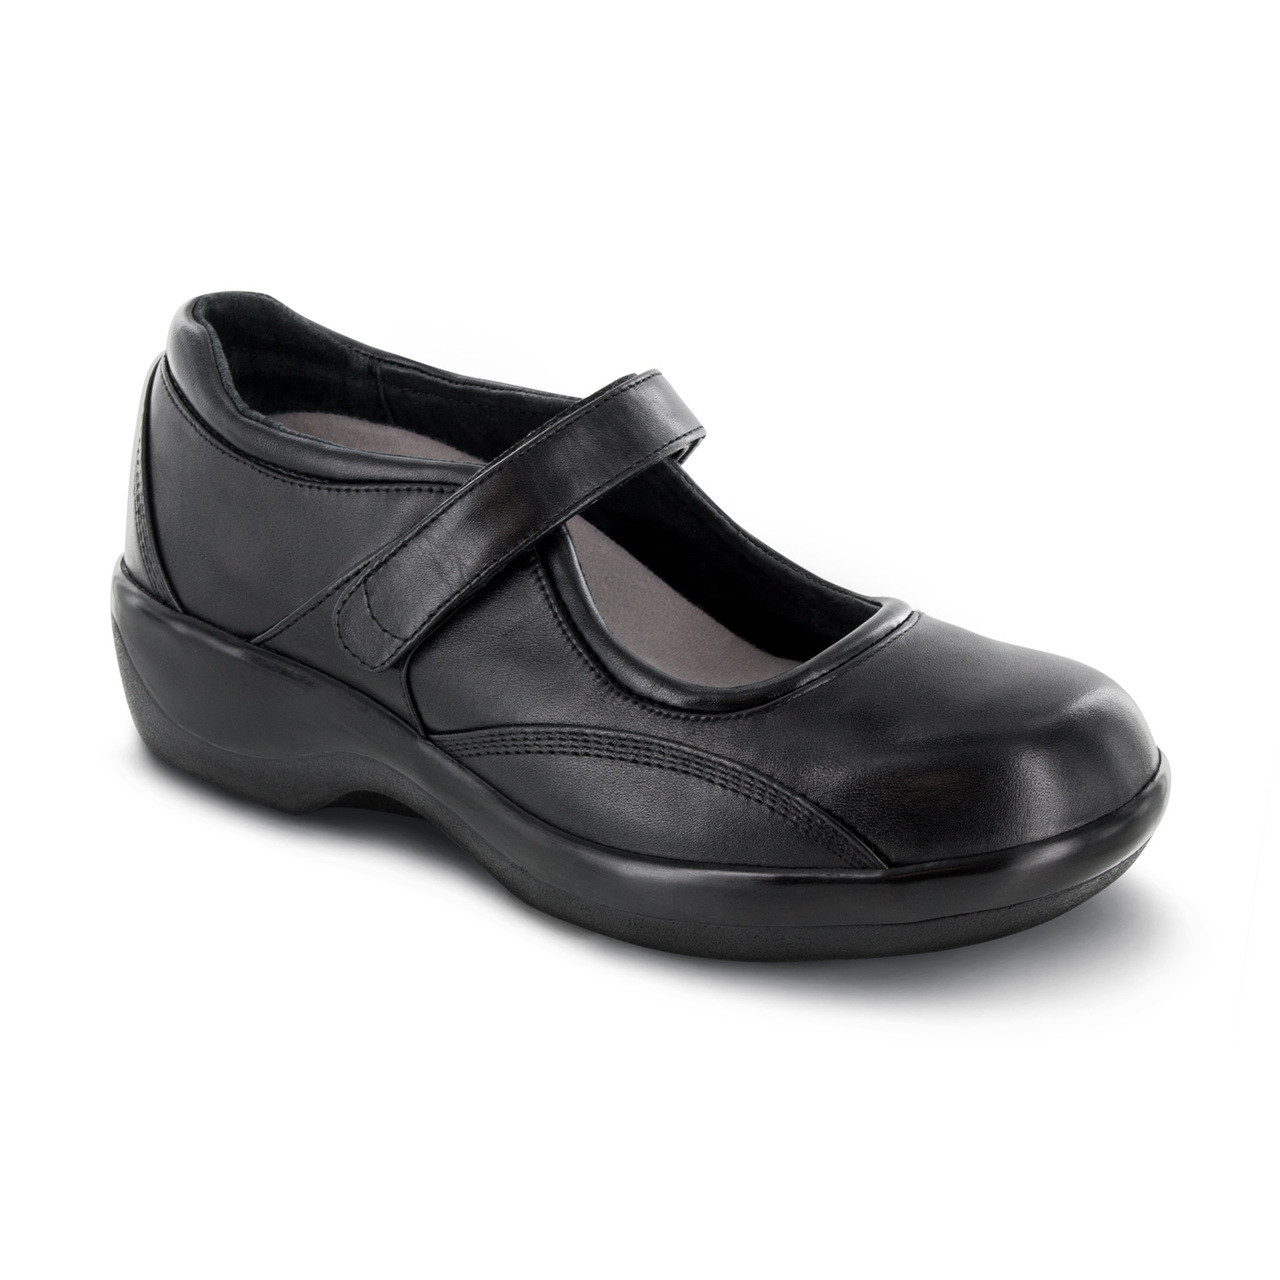 mary jane shoes for plantar fasciitis